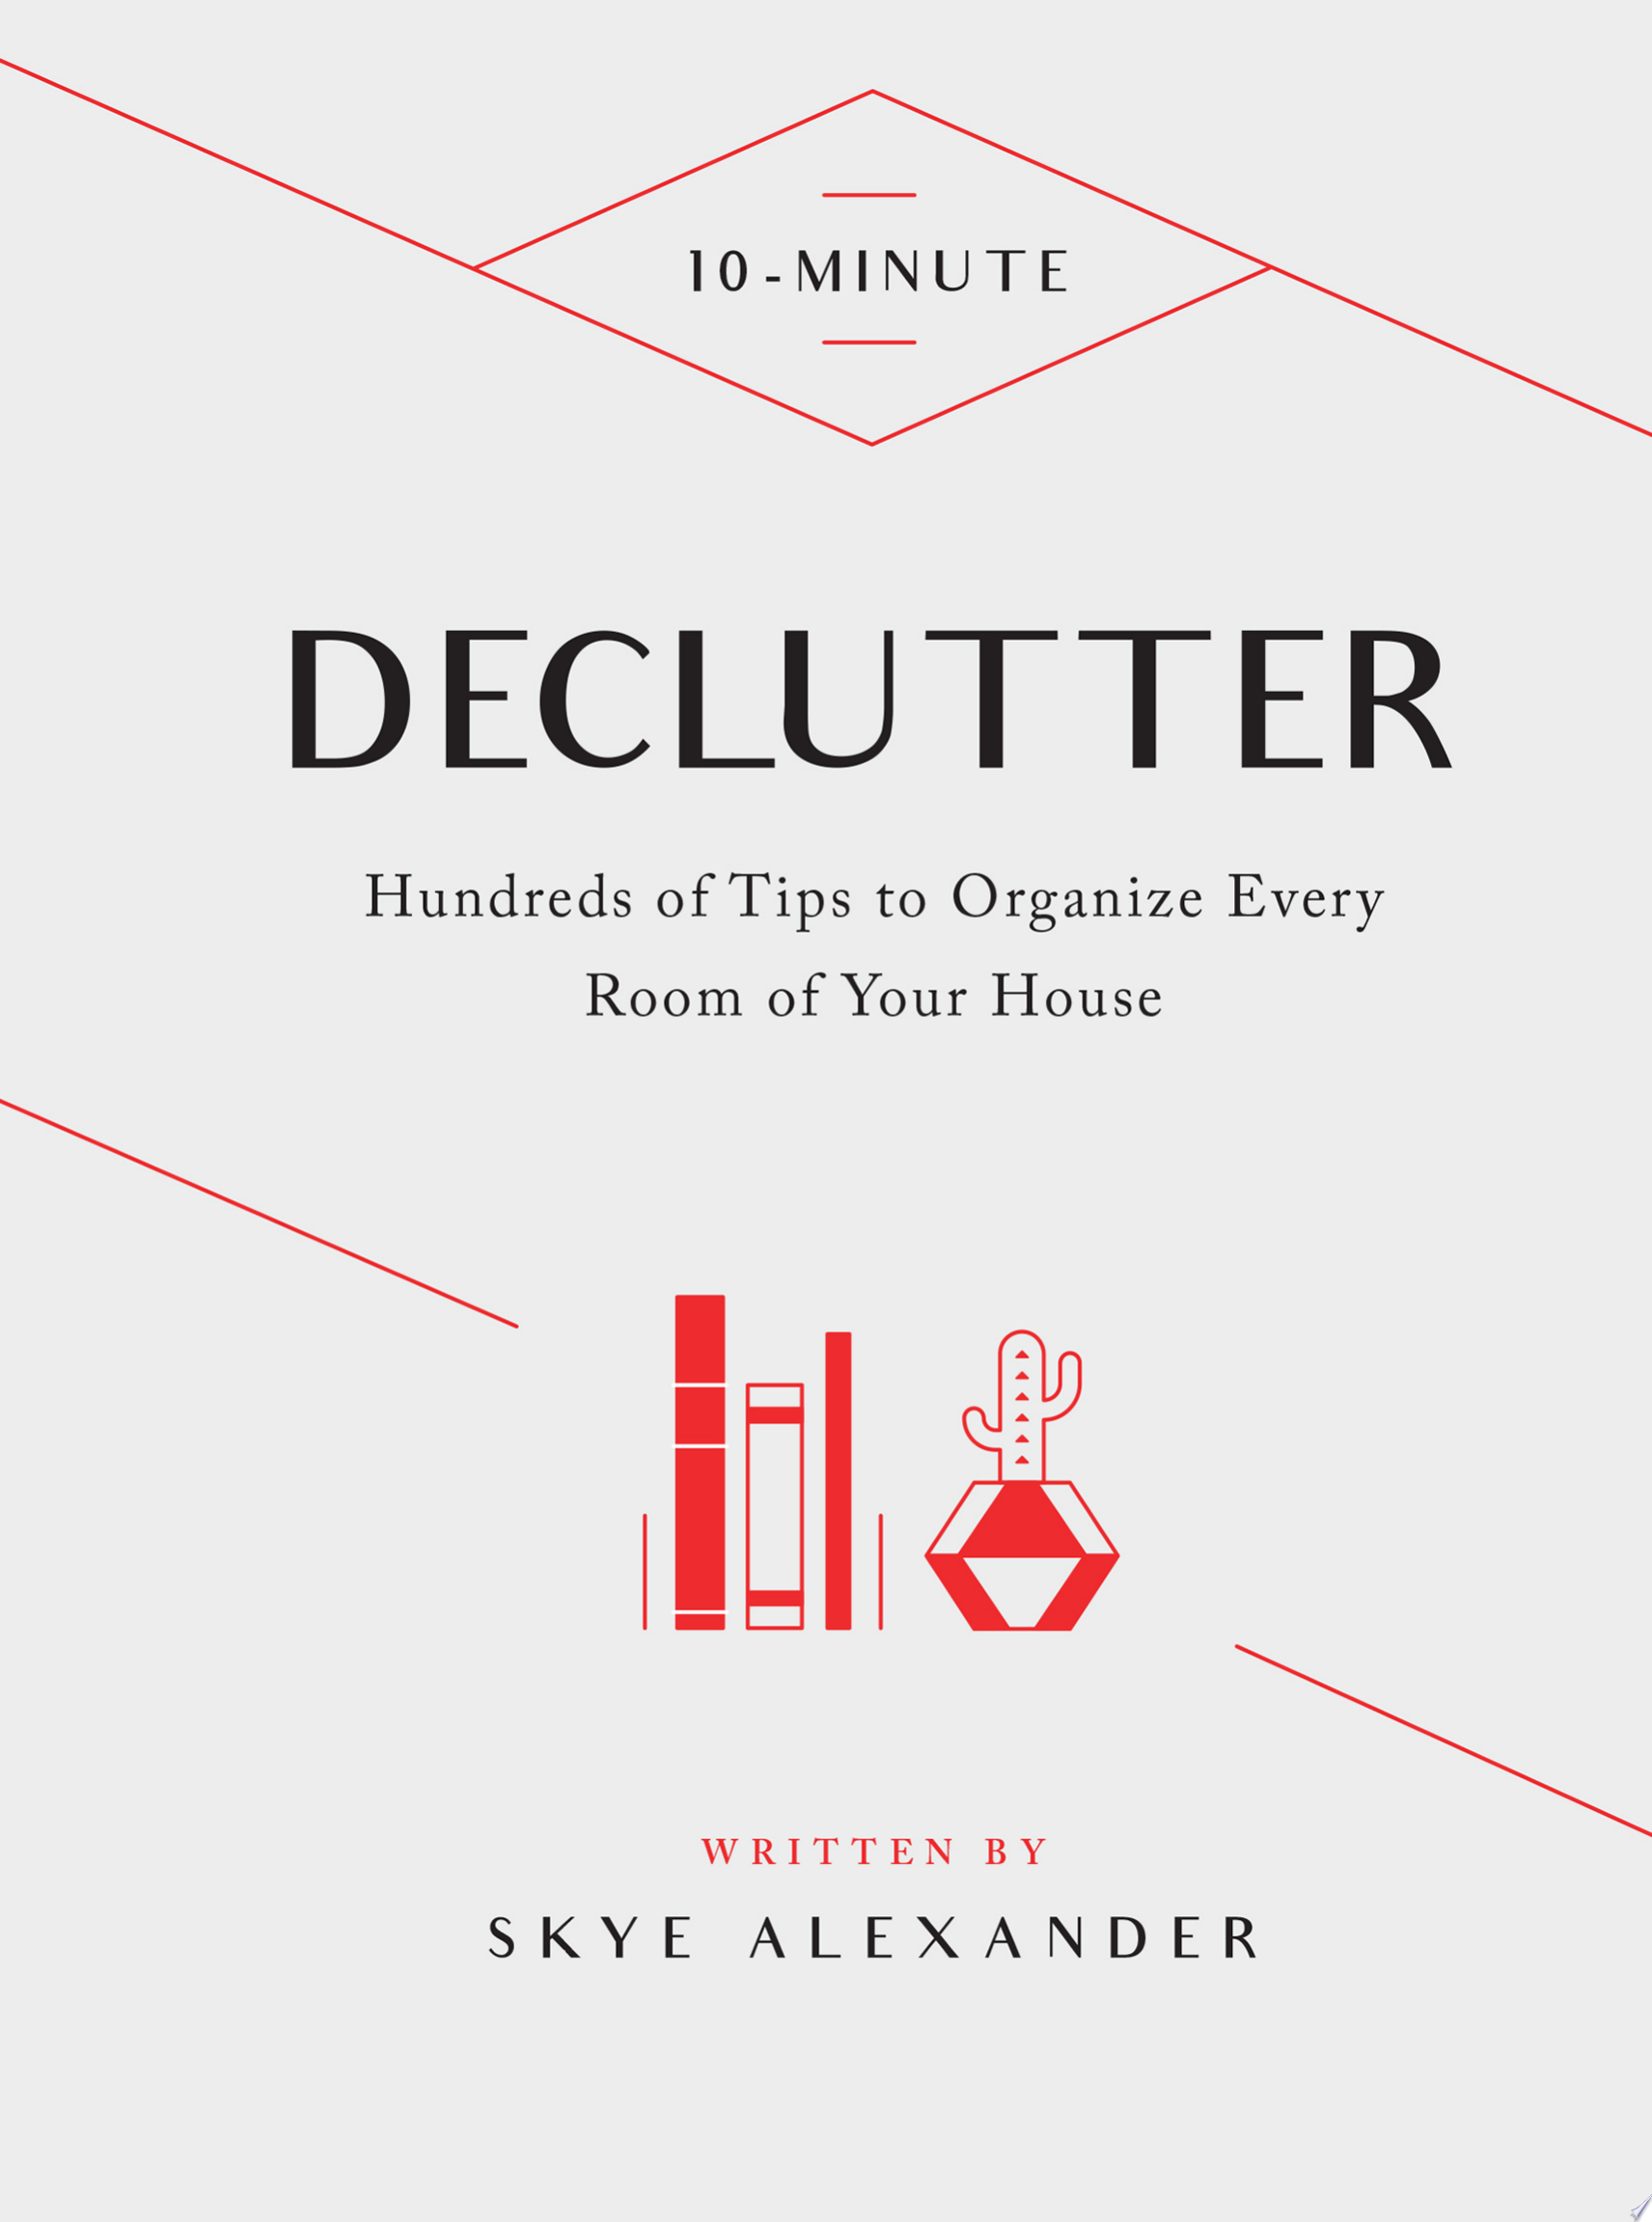 Image for "10-Minute Declutter"